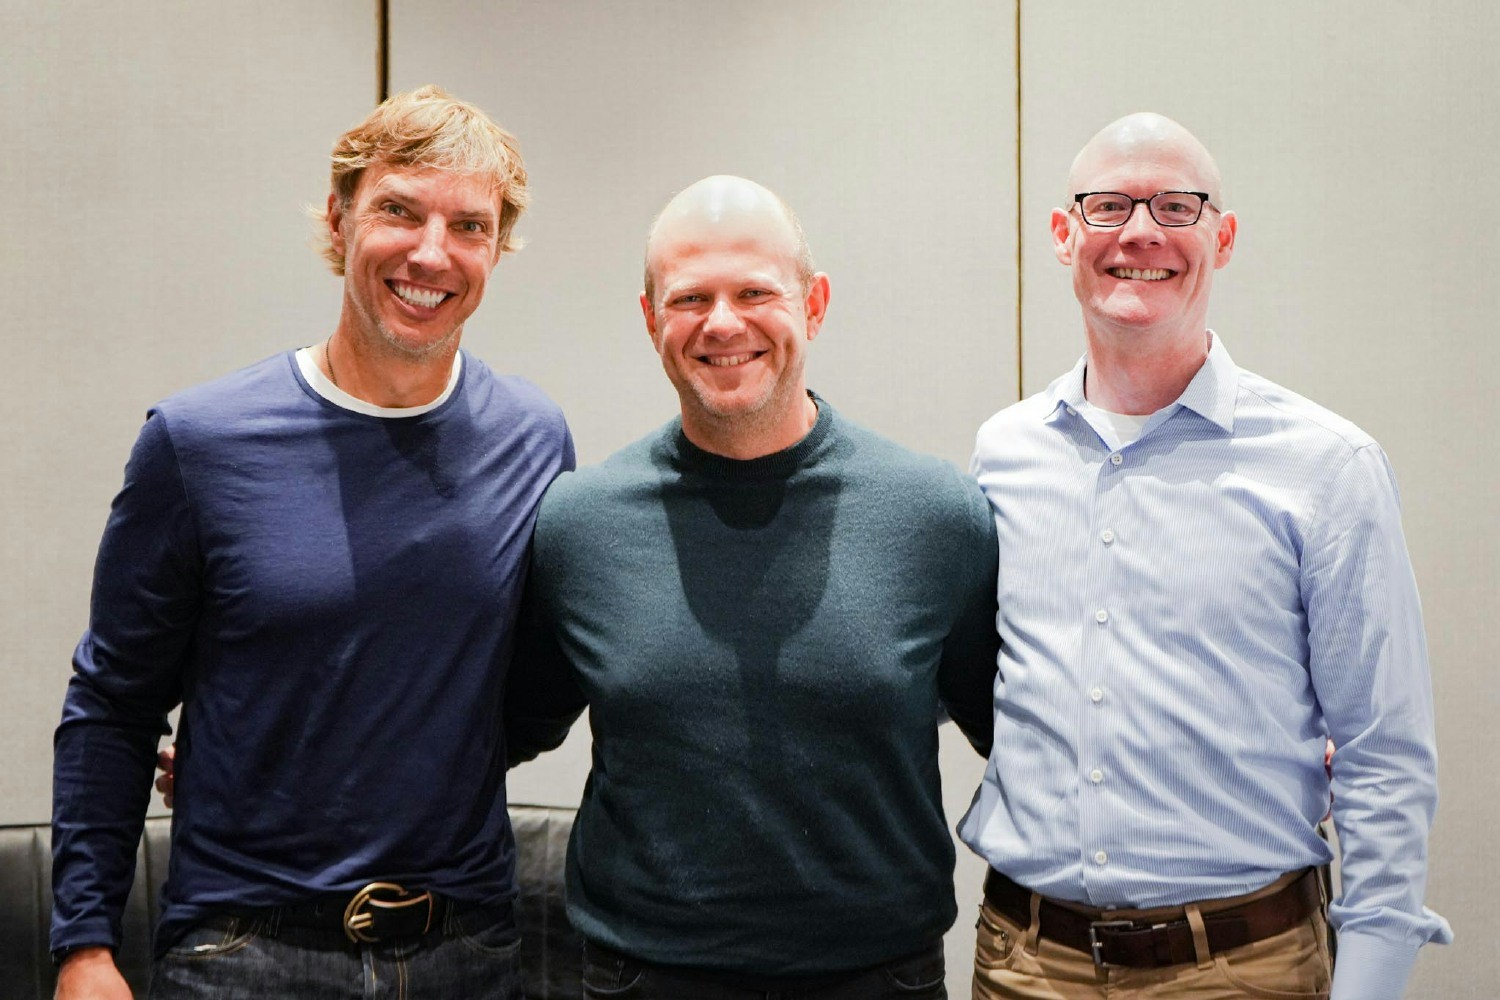 BAM's Founders (left to right): Scott Schroeder, Dmitry Balyasny, Taylor O'Malley